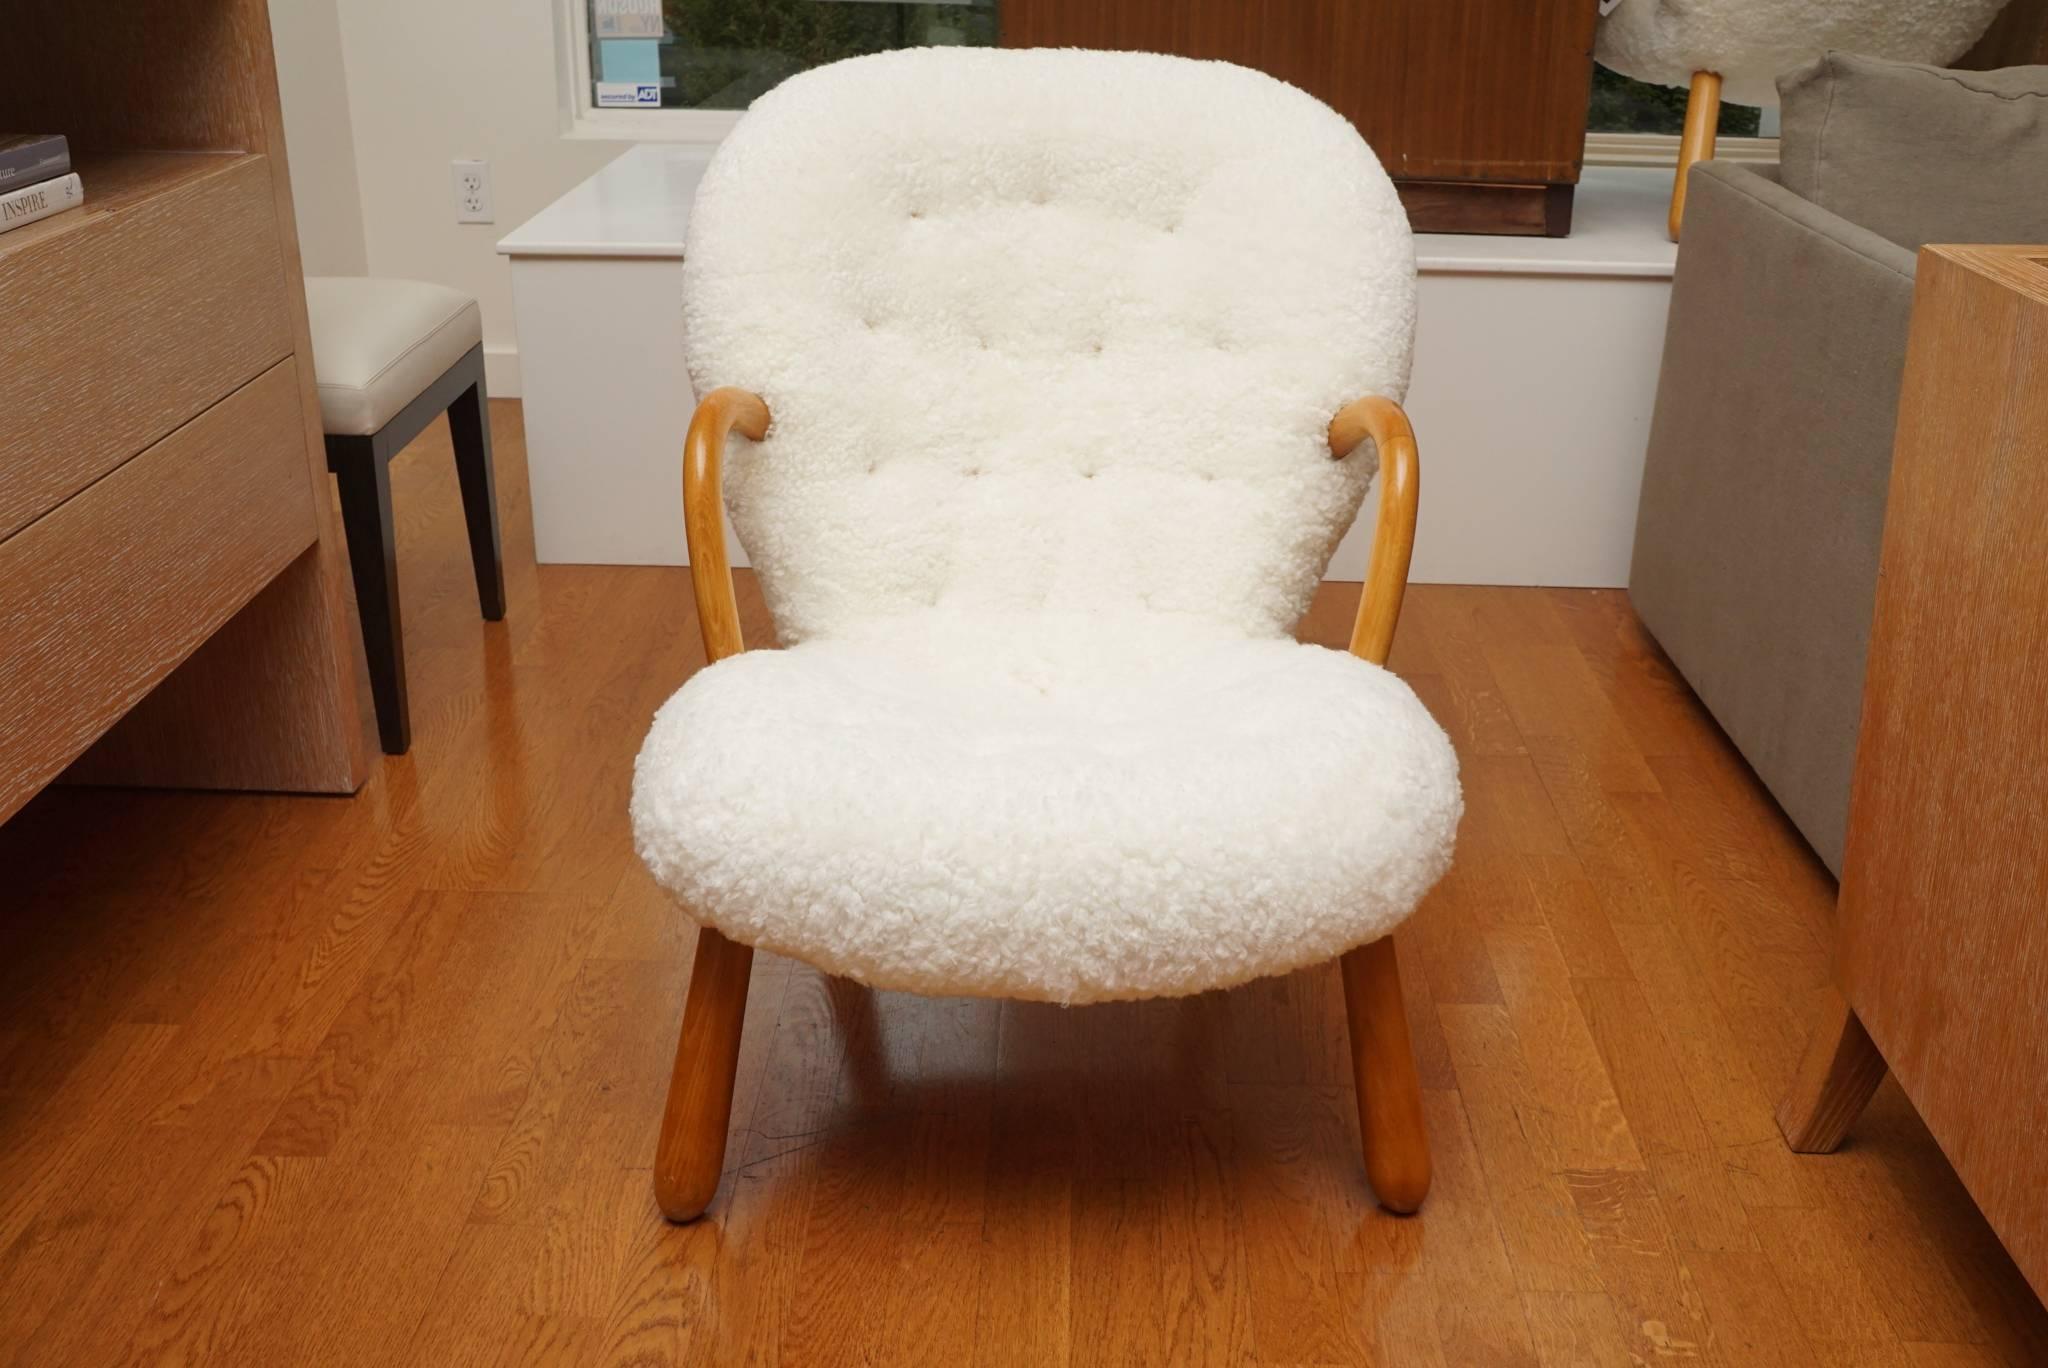 Rare! a pair of oak clam chairs, designed by Phillip Arctander of Denmark for Paustian. The chairs are upholstered in a luscious, irresistible sheepskin. 
Not only are they handsome, the chairs, 